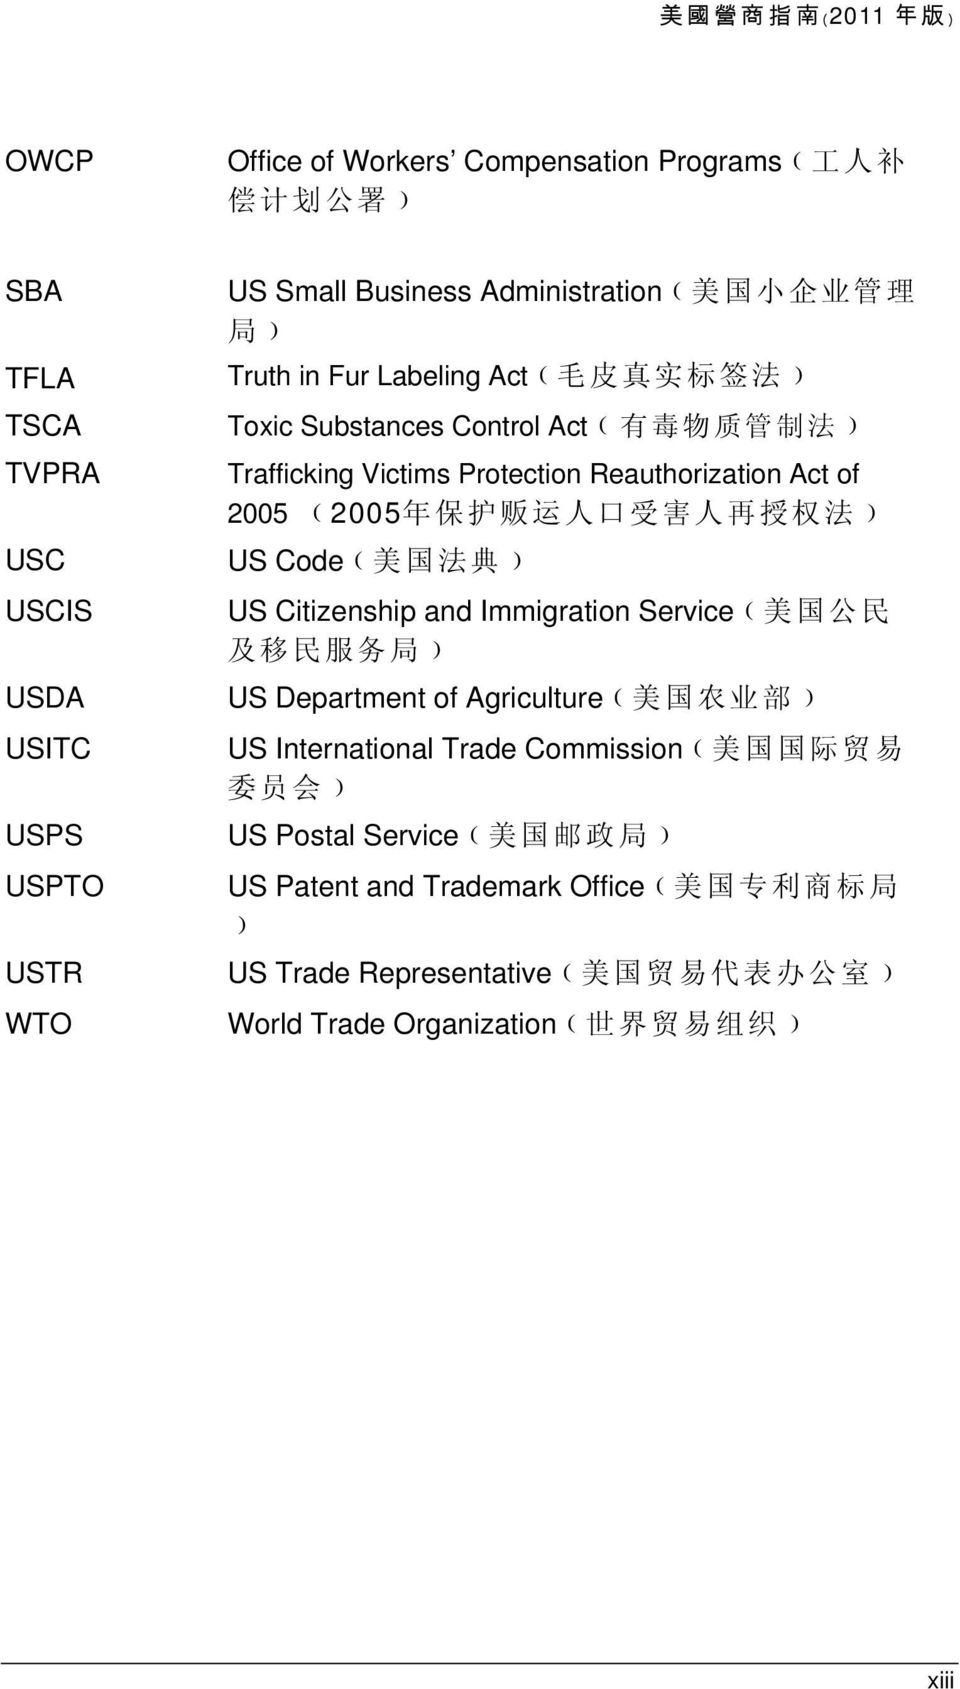 授 权 法 ) US Code( 美 国 法 典 ) US Citizenship and Immigration Service( 美 国 公 民 及 移 民 服 务 局 ) US Department of Agriculture( 美 国 农 业 部 ) US International Trade Commission( 美 国 国 际 贸